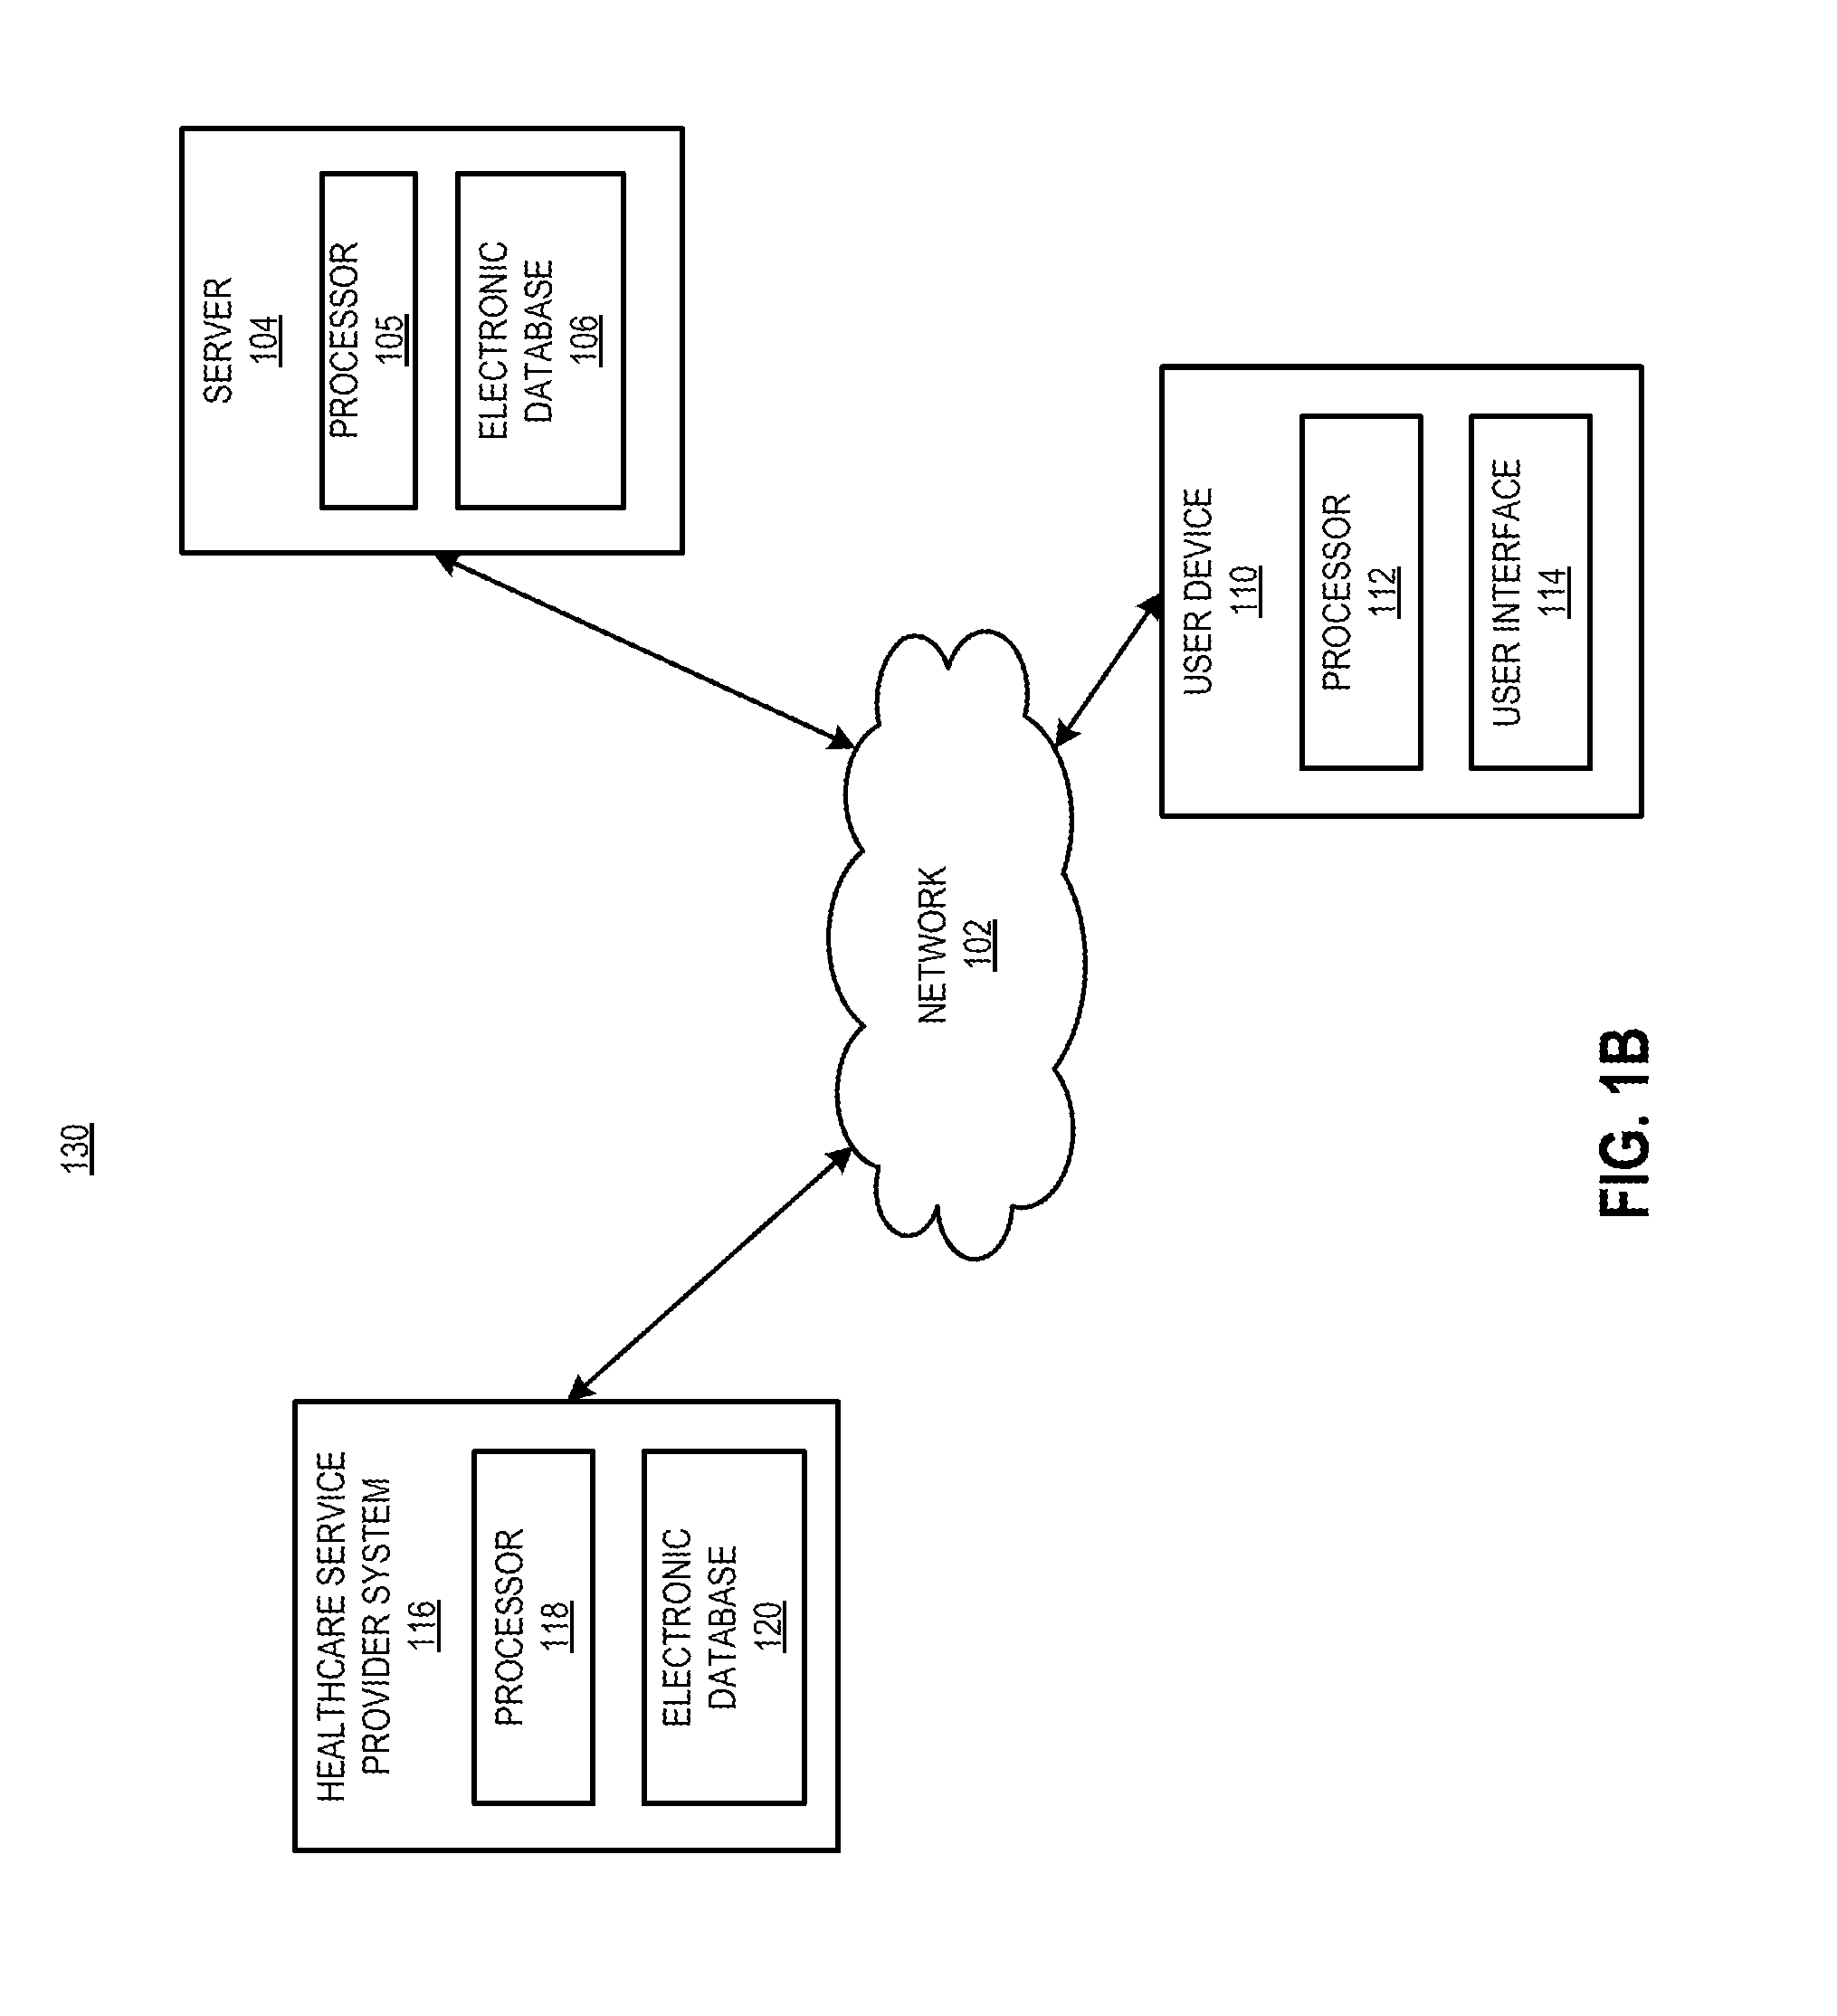 Methods of distributing complement-inhibiting drugs to patients receiving a complement inhibitor